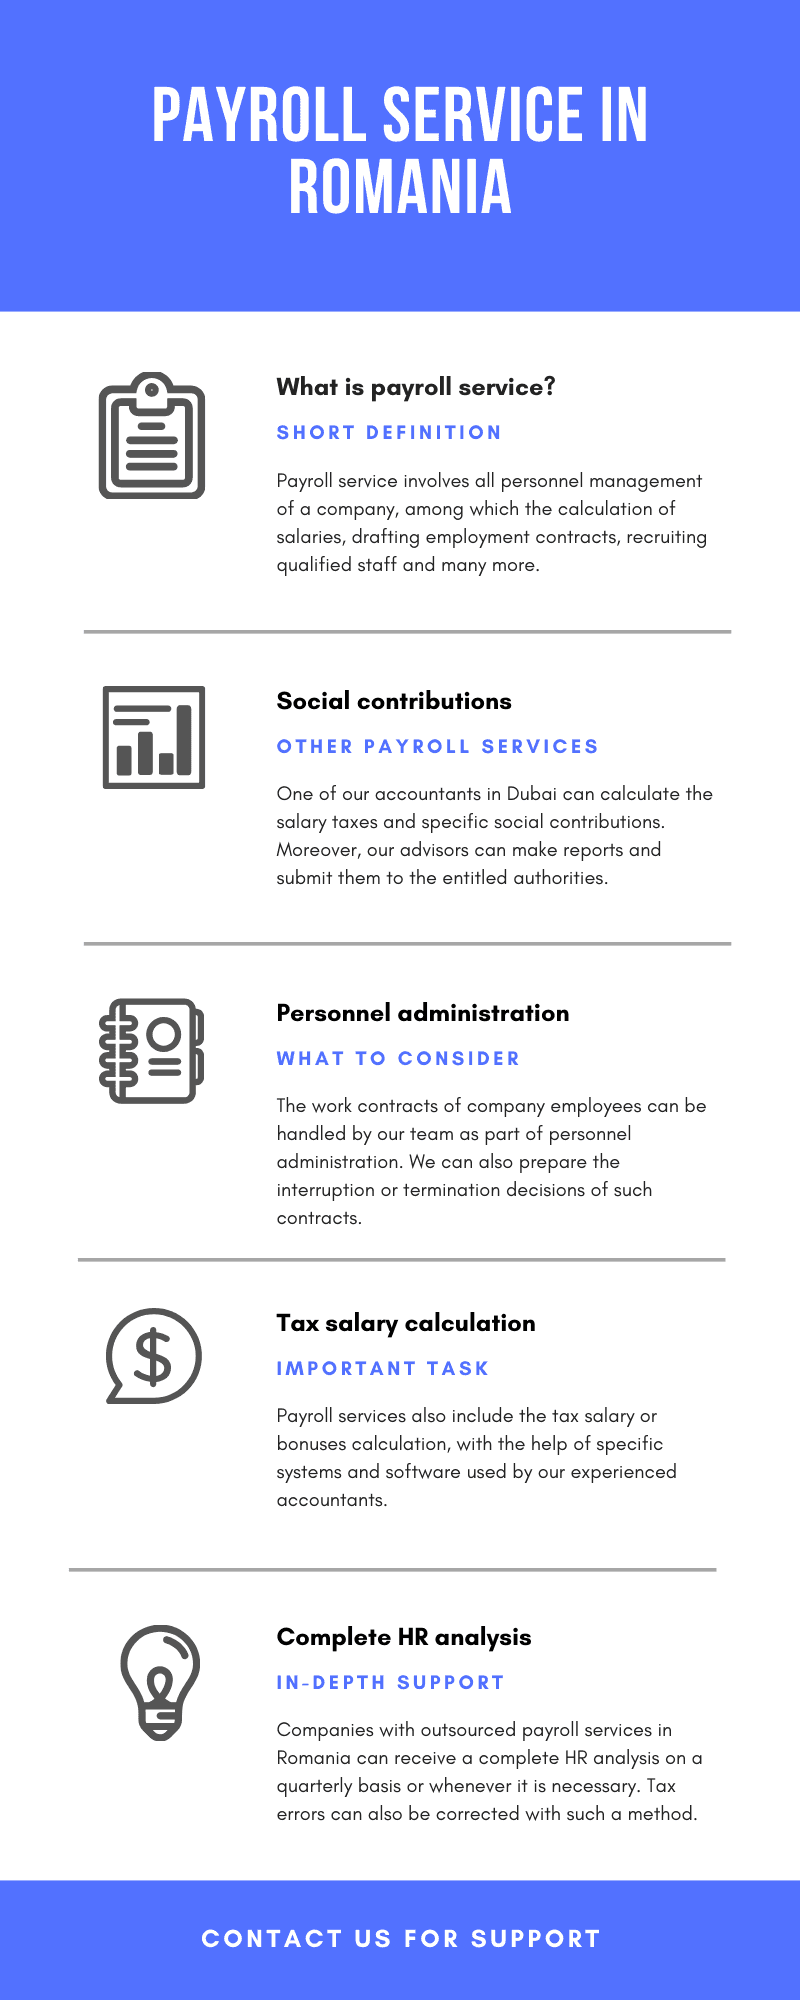 Payroll service in Romania 01.png